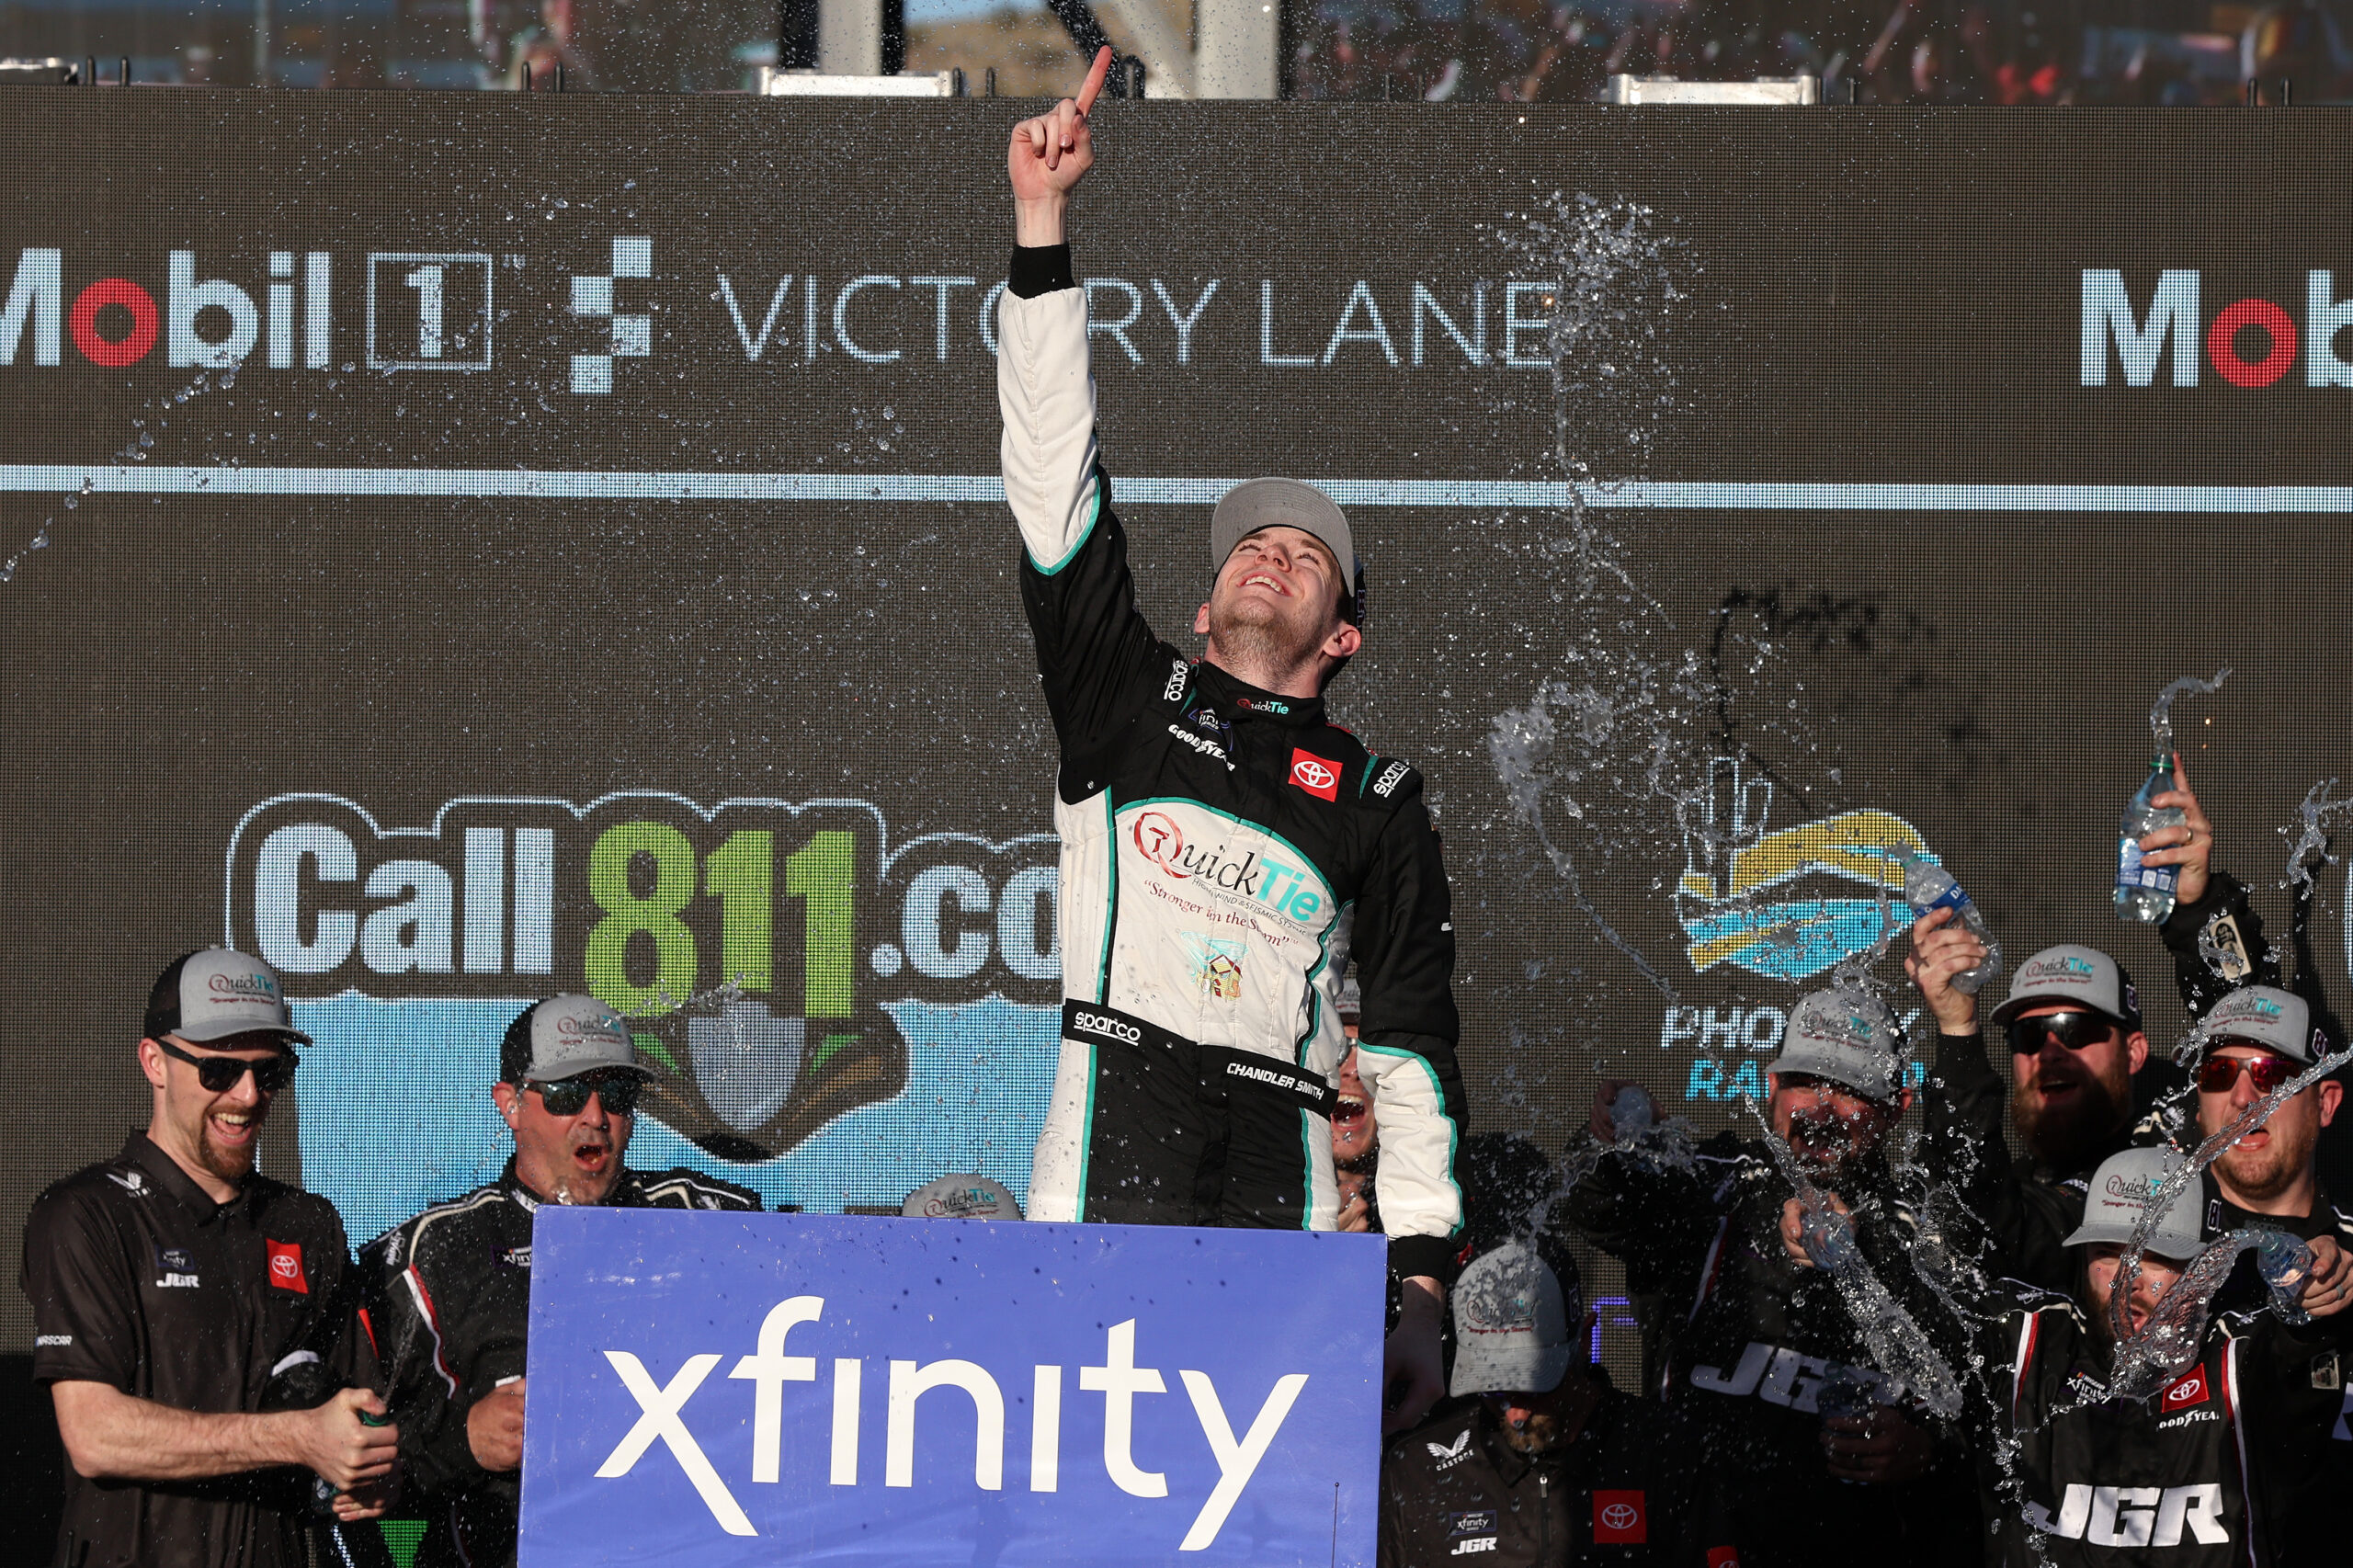 Chandler Smith wins NASCAR Xfinity Series race in overtime at Phoenix Raceway